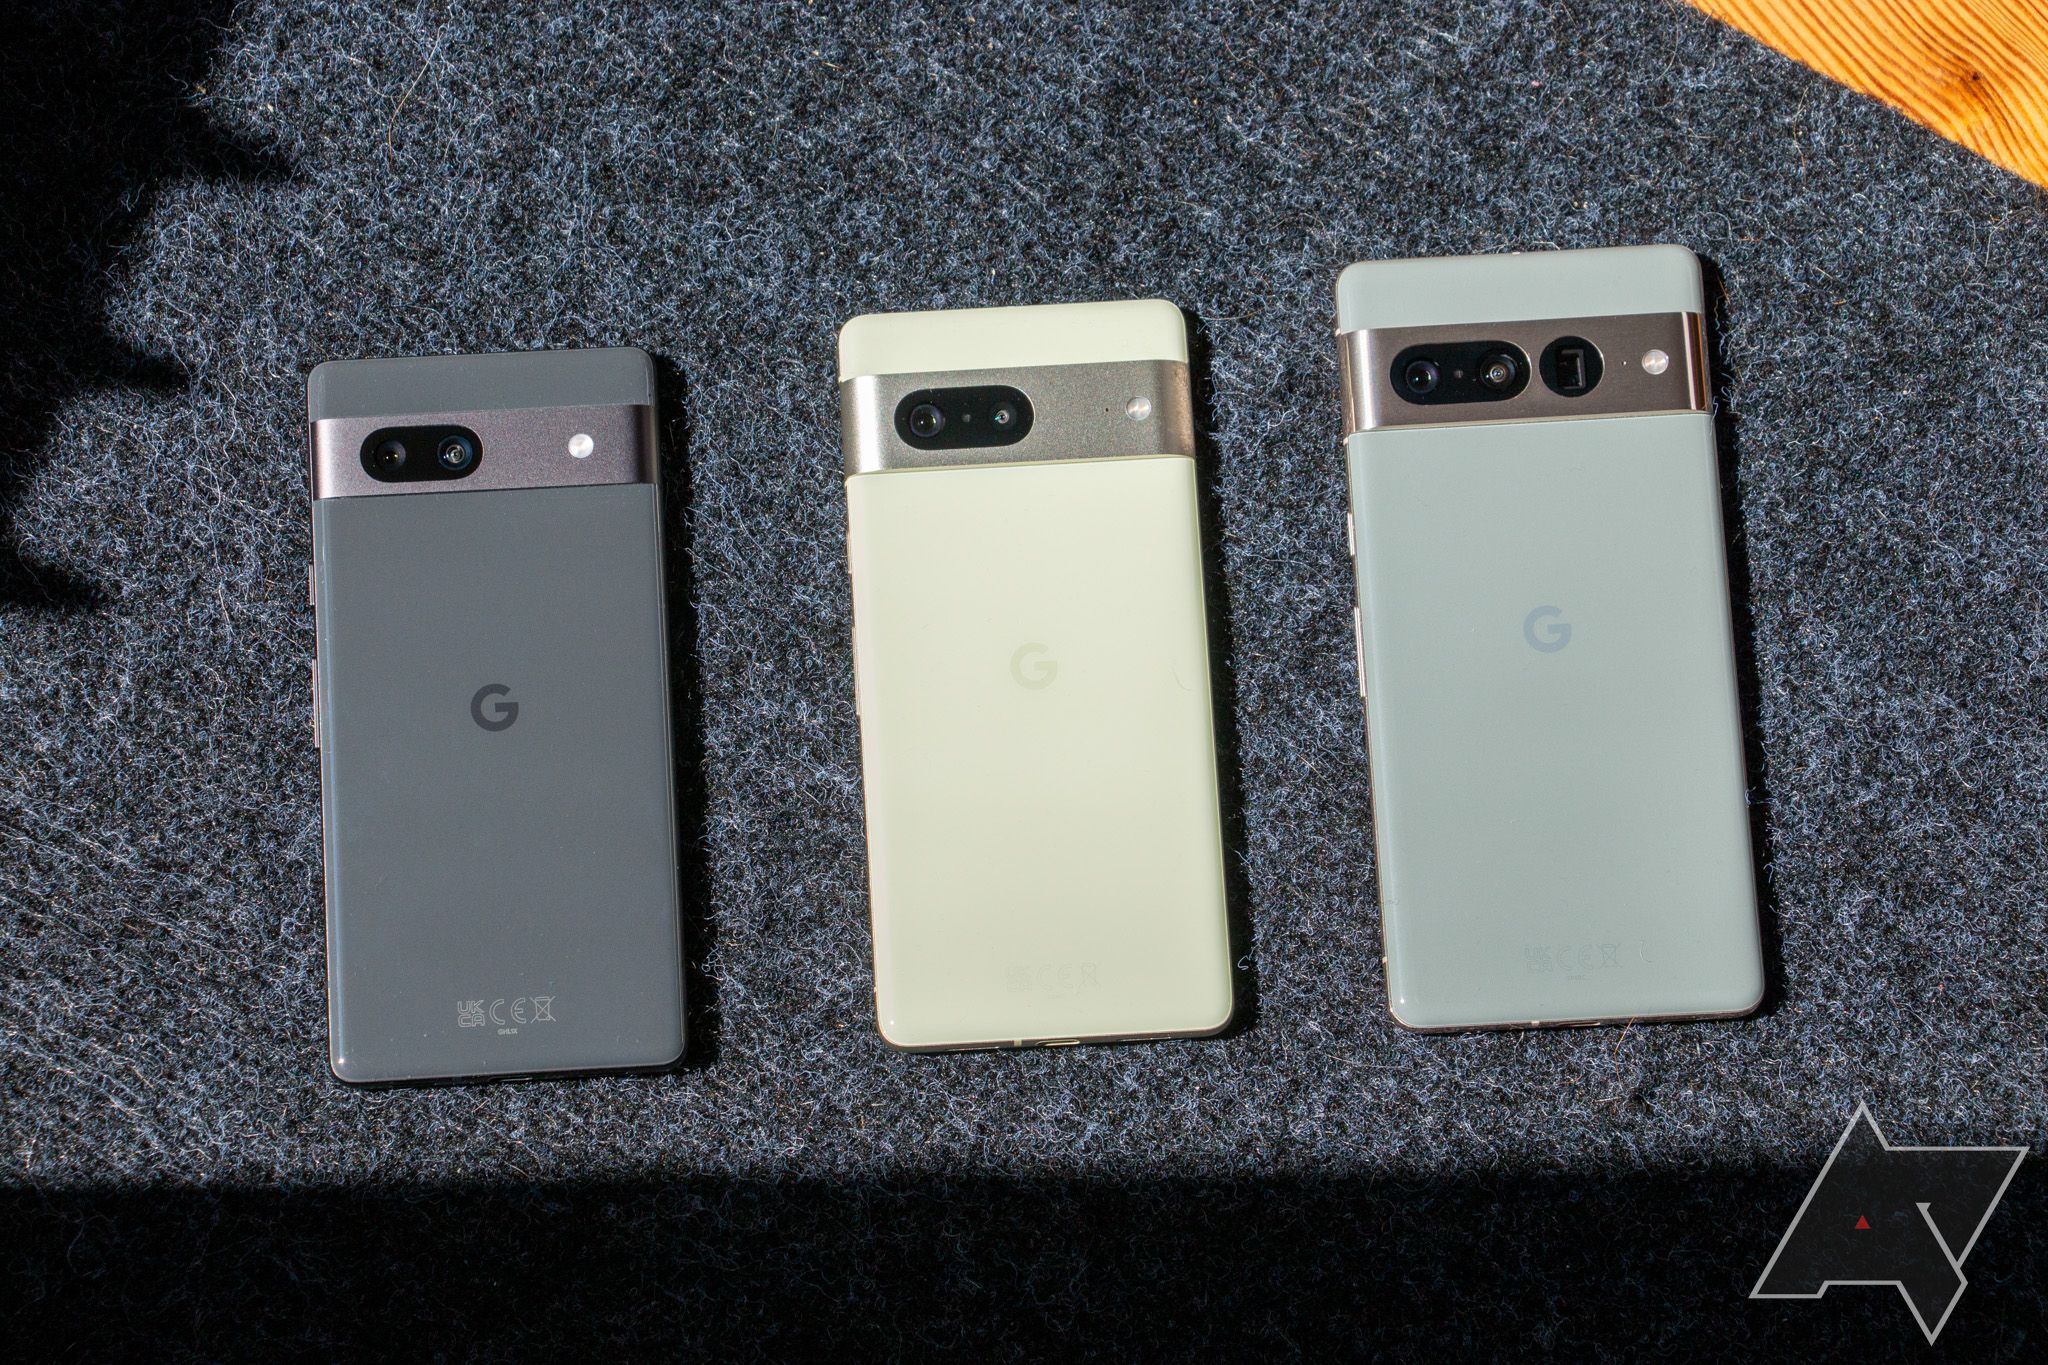 The Pixel 7a resting on gray fabric to the left of the Pixel 7 and Pixel 7 Pro.